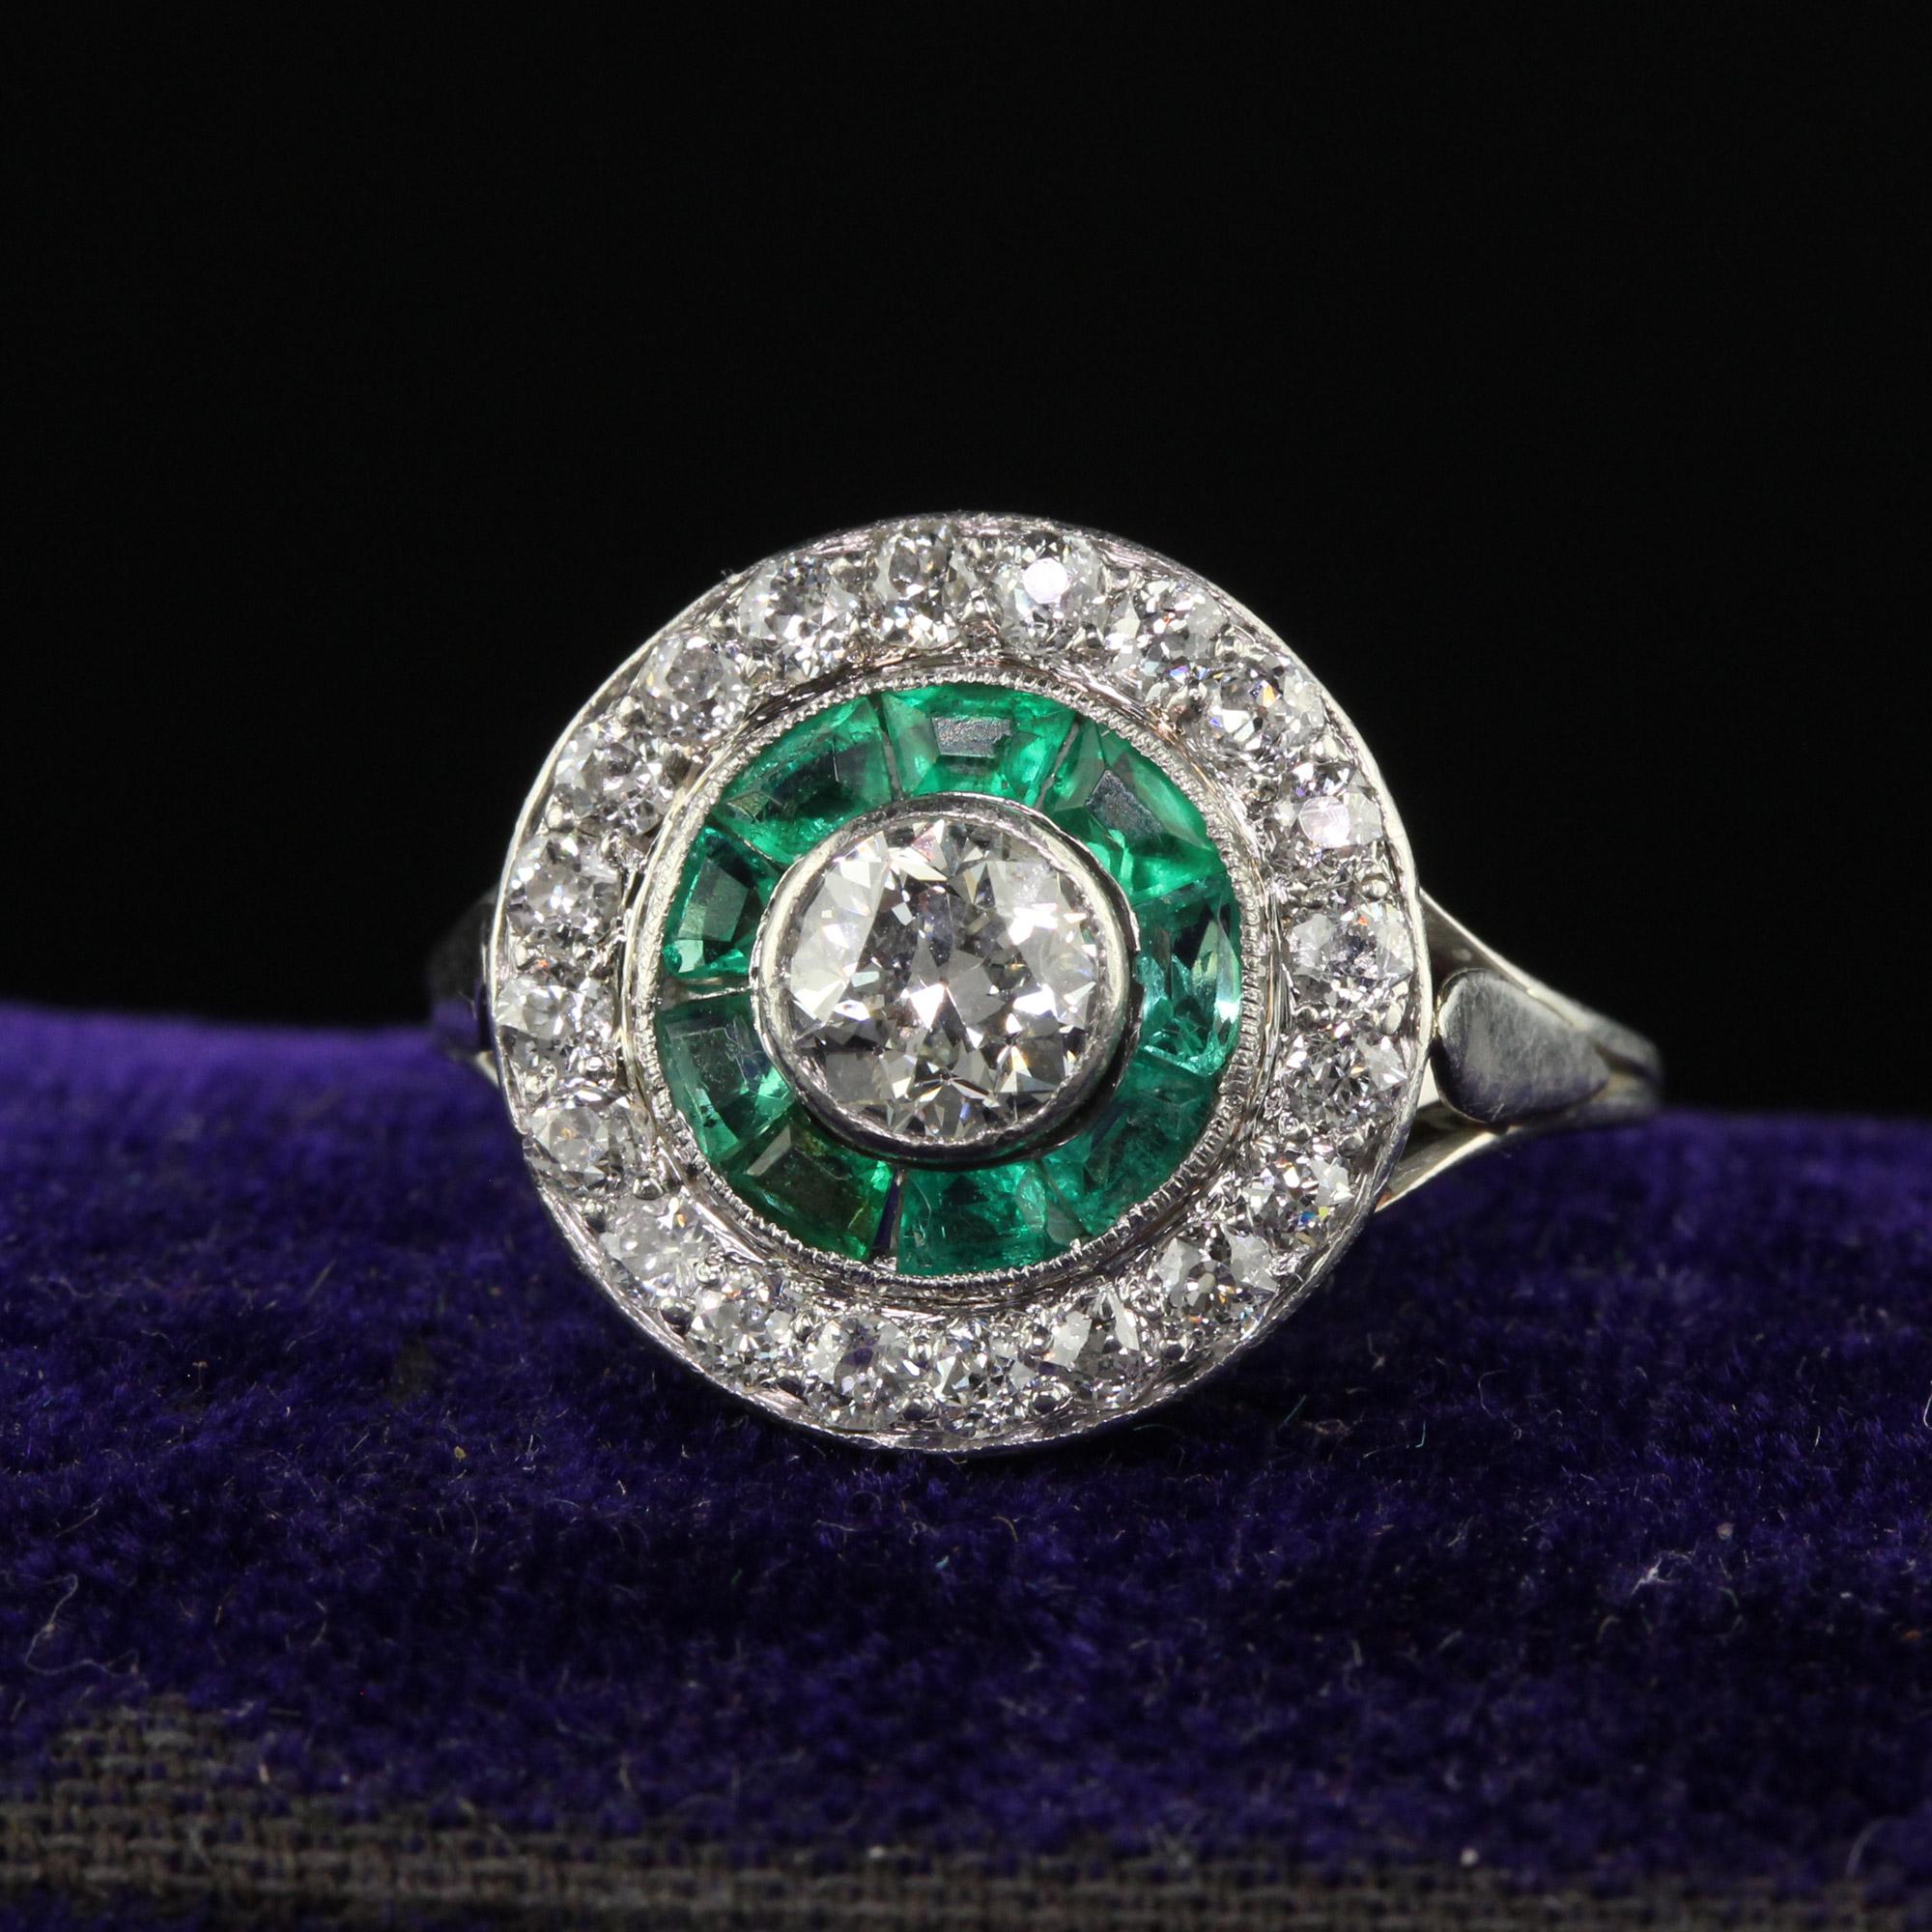 Beautiful Antique Art Deco Platinum Old Euro Diamond and Emerald Engagement Ring. The center holds a beautiful old European cut diamond that is surrounded by natural emeralds. The outer halo has old European cut diamonds as well and the ring is in